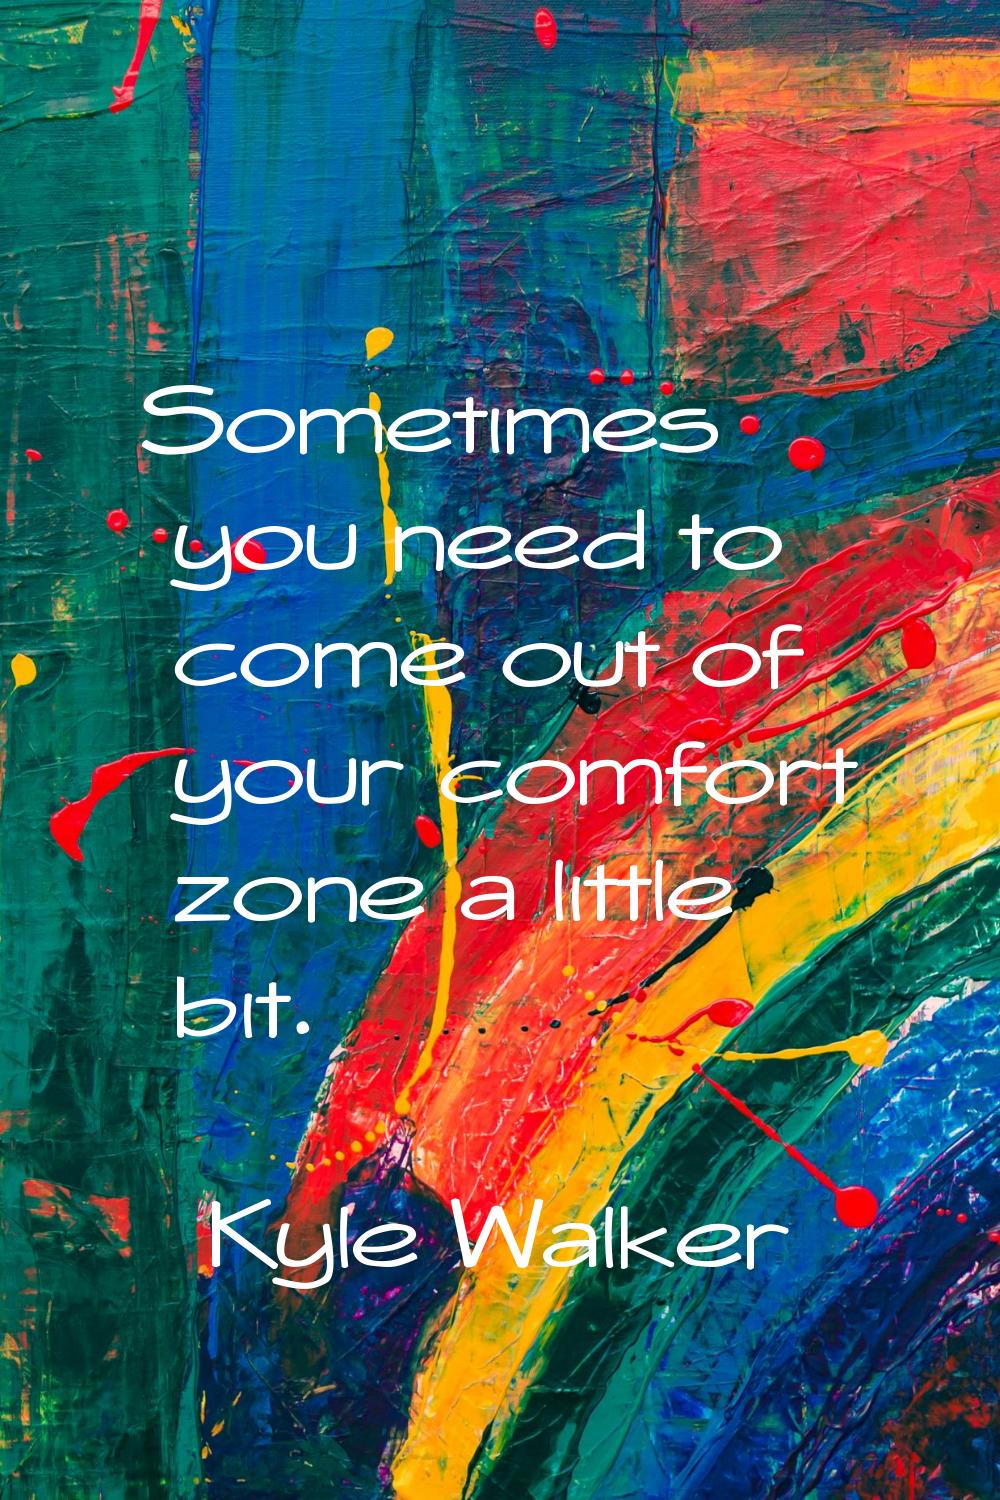 Sometimes you need to come out of your comfort zone a little bit.